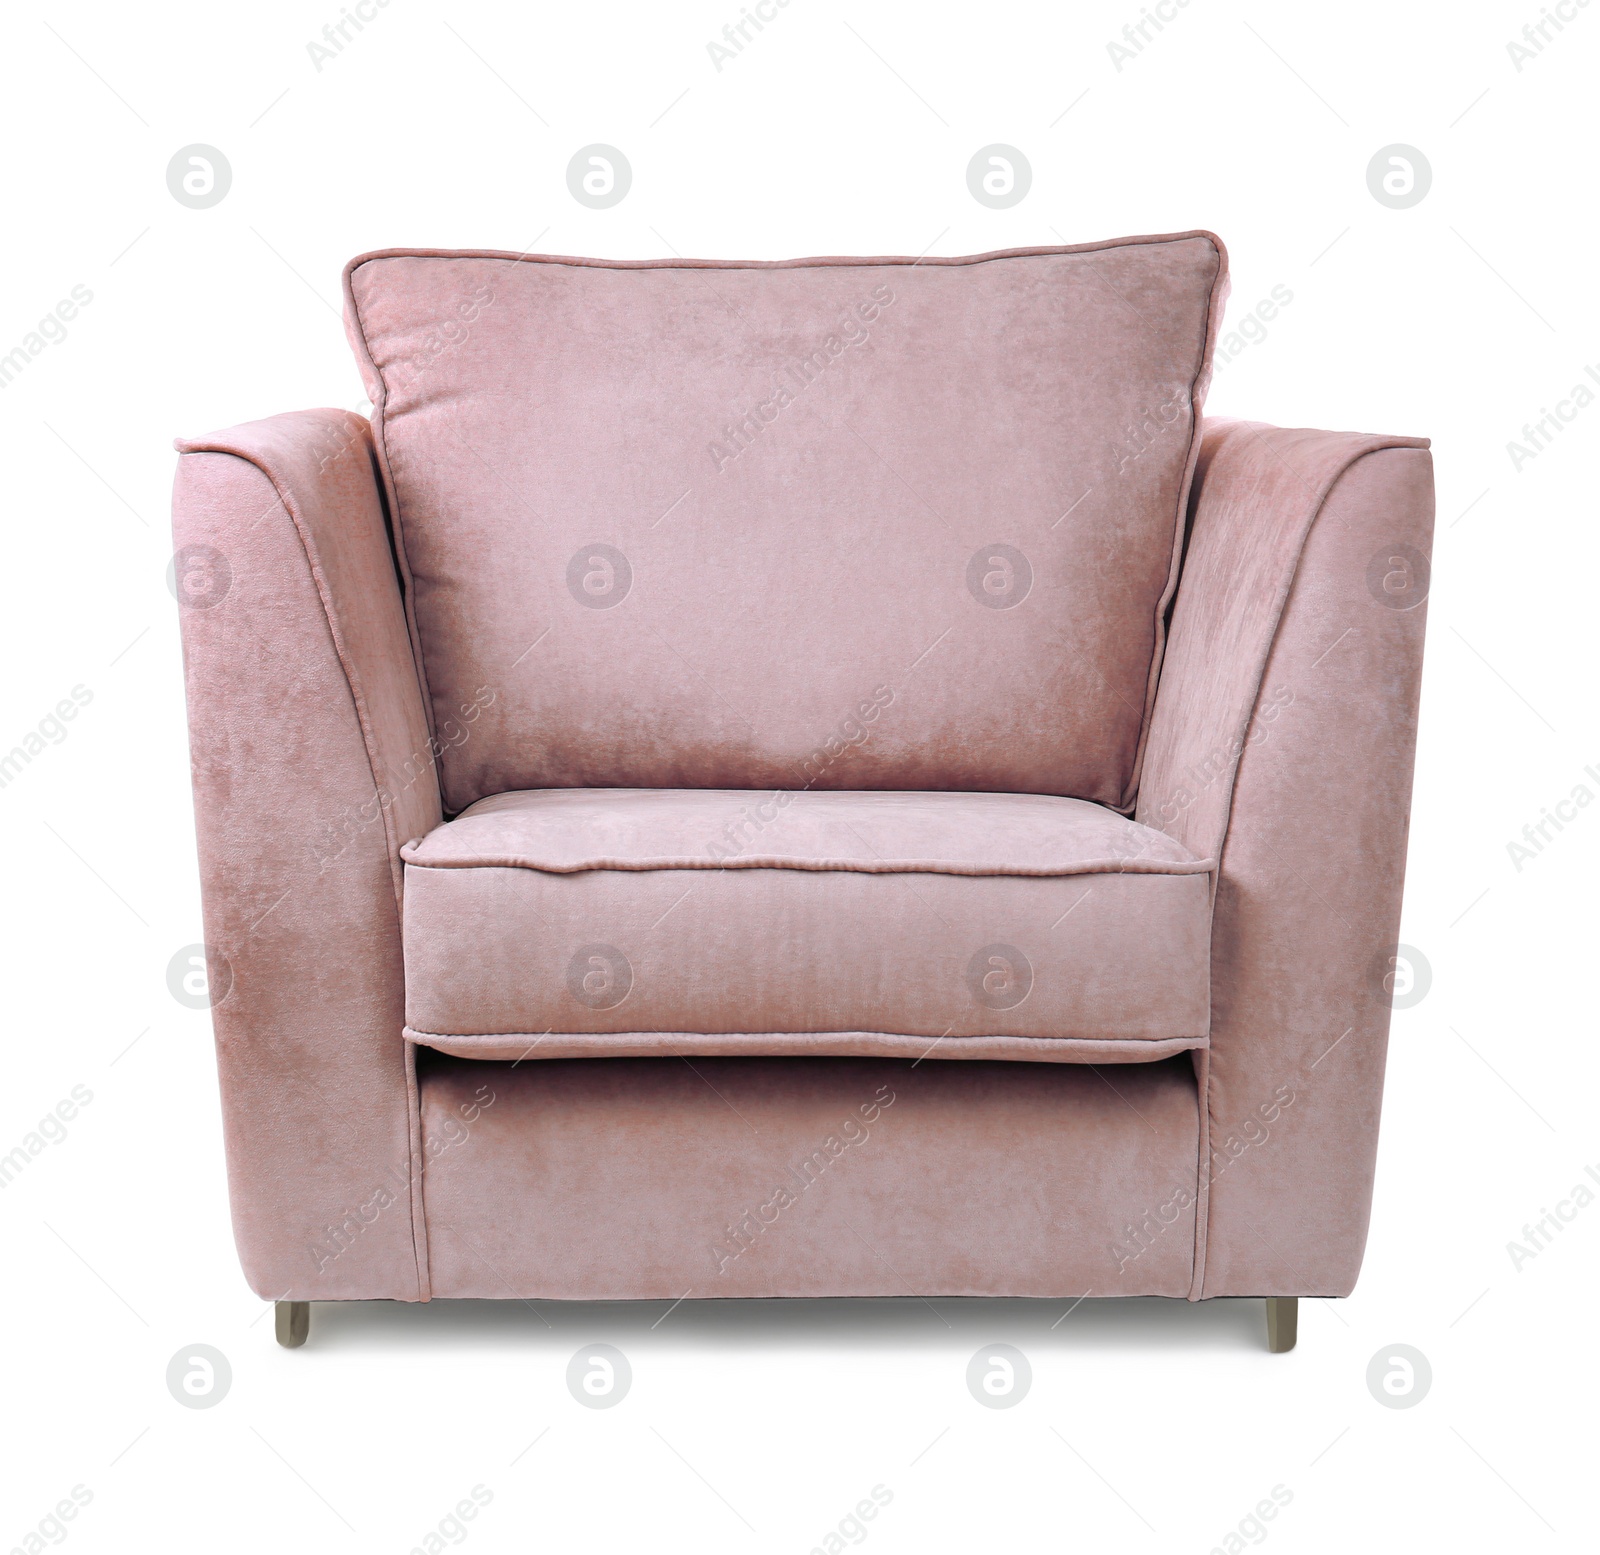 Image of One comfortable rosy brown armchair isolated on white